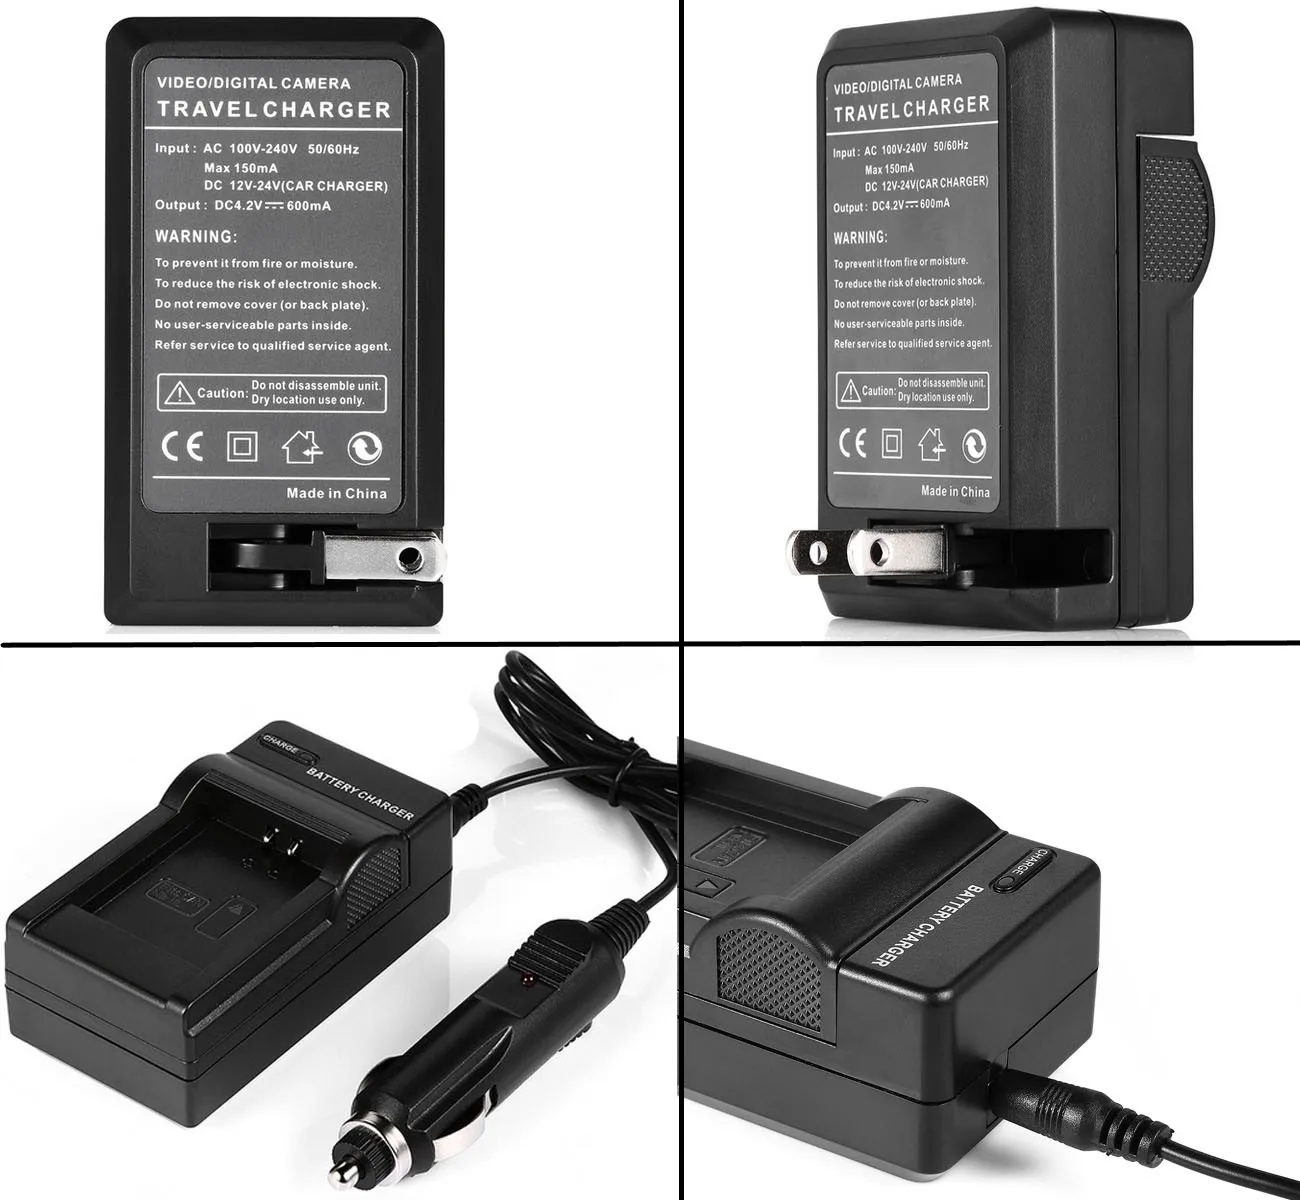 CJP-Geek in-Camera Battery Power Charger AC Adapter Cord for Kodak Easyshare Z1015 is